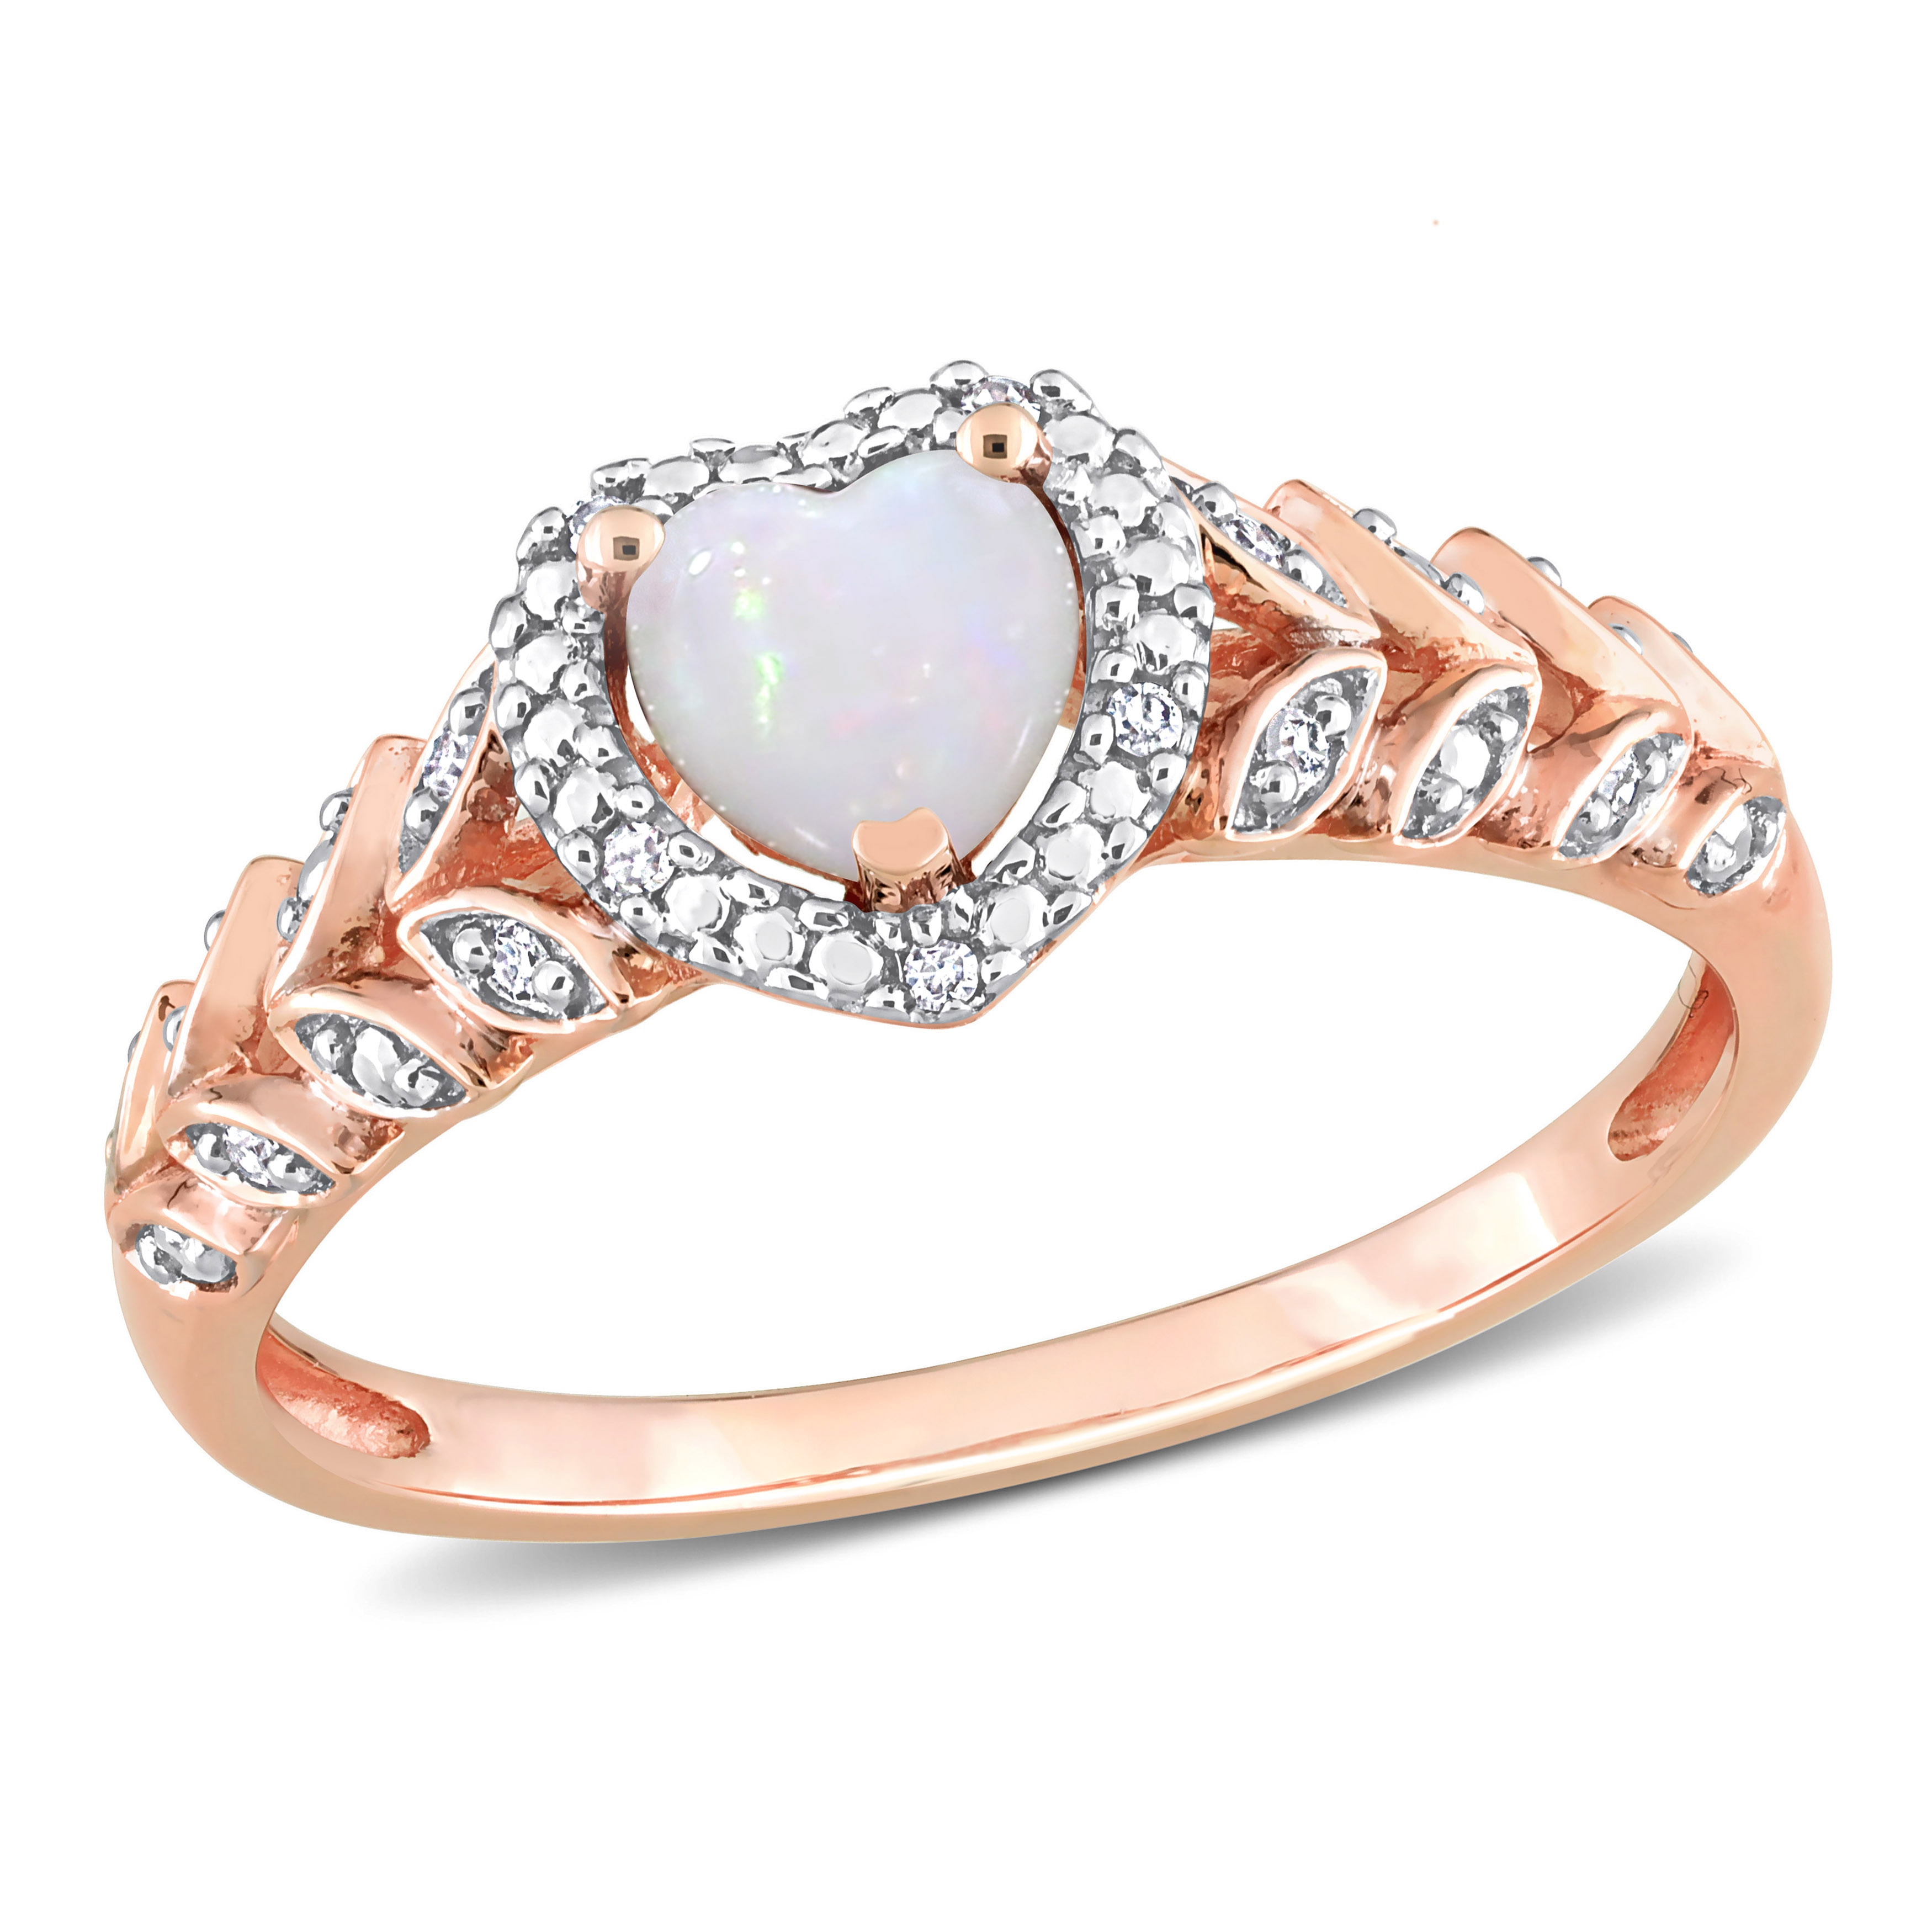 1/3 CT TGW Heart Shape Opal and Diamond Accent Halo Ring 10k Rose Gold